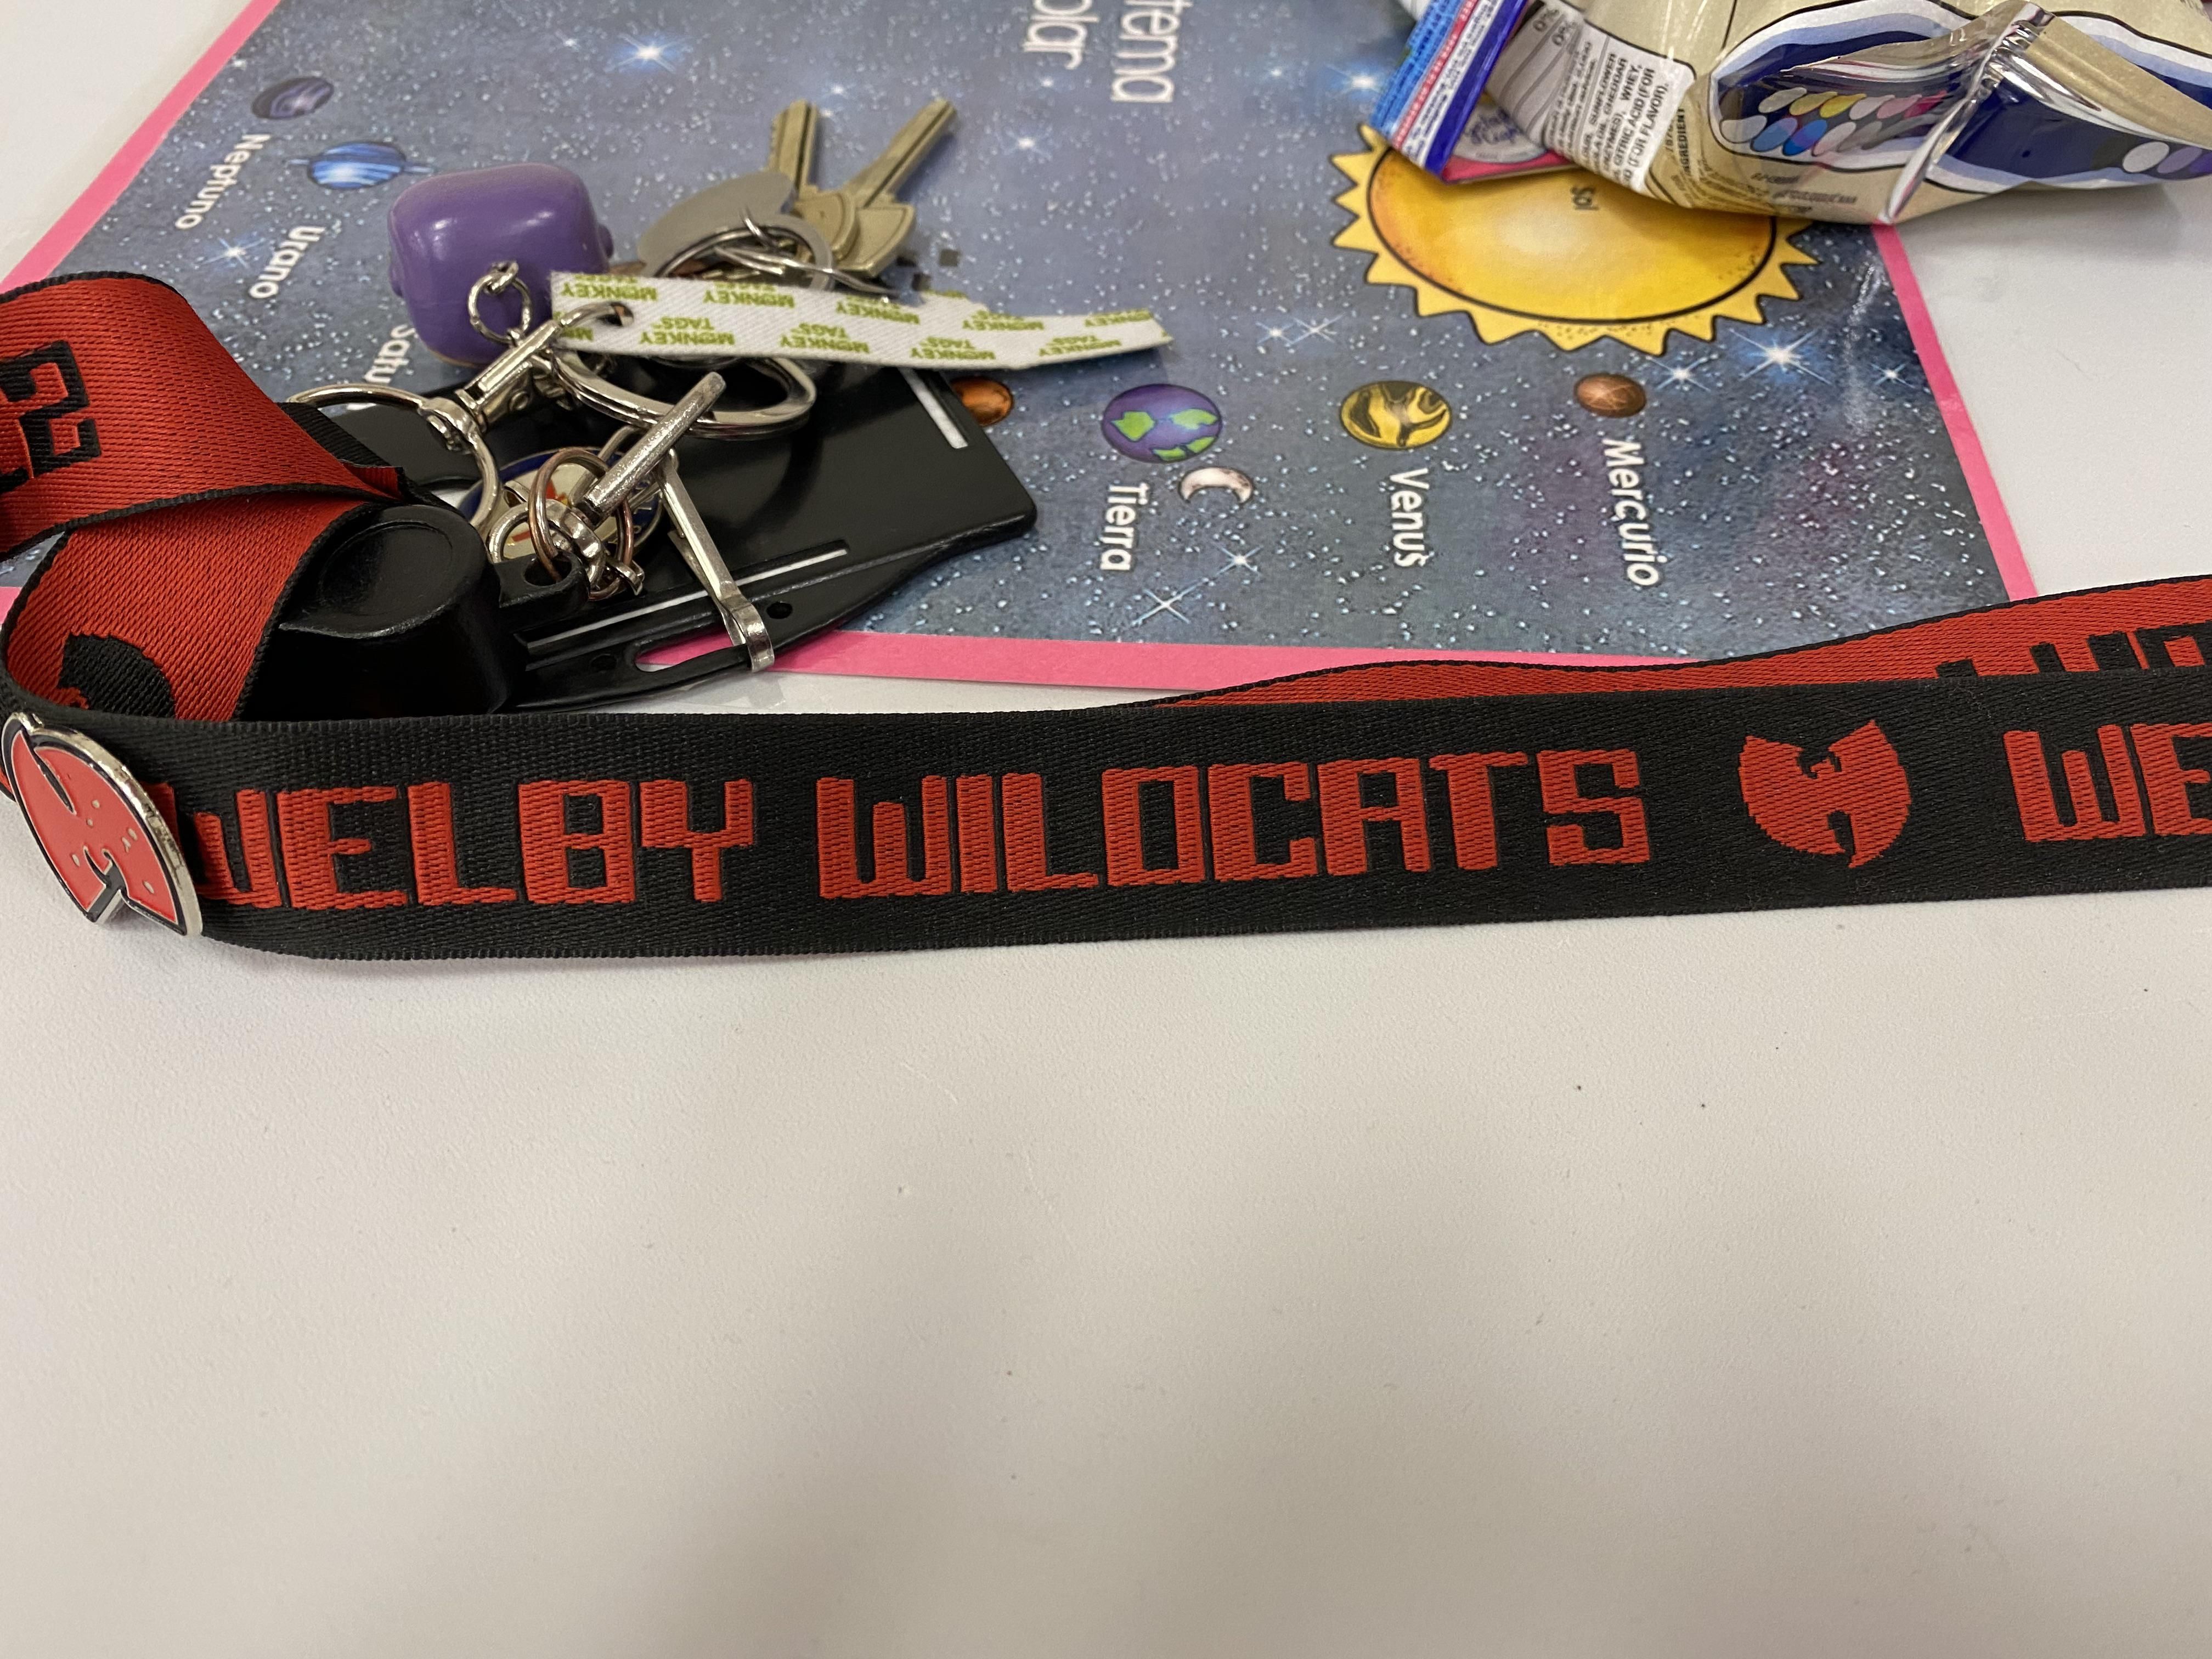 All the teachers at my kids school got a new lanyards. Apparently Welby Elementary ain’t nuthin to *** with